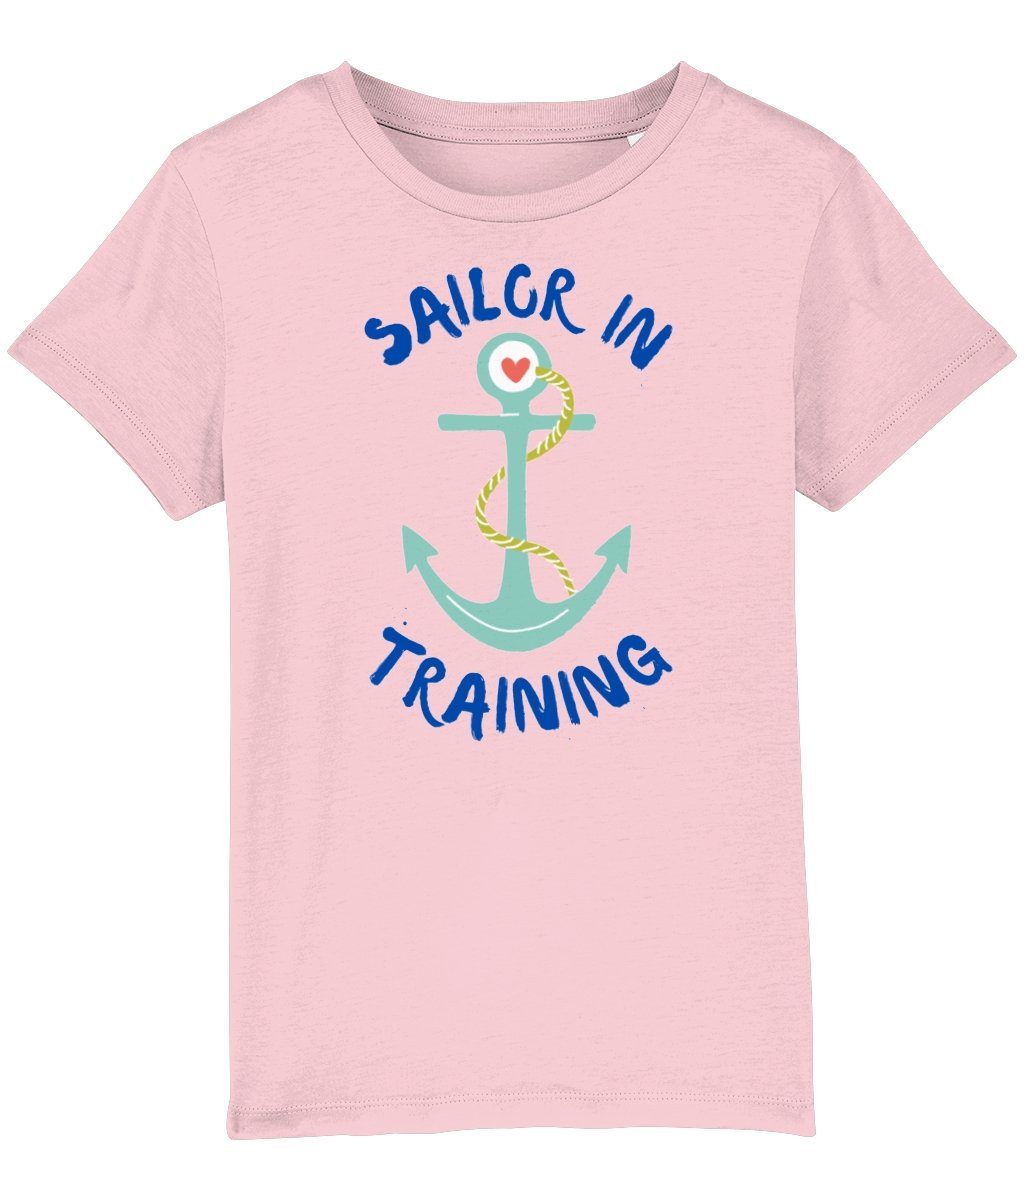 Sailor in Training Kids Tee - The Chits Inn